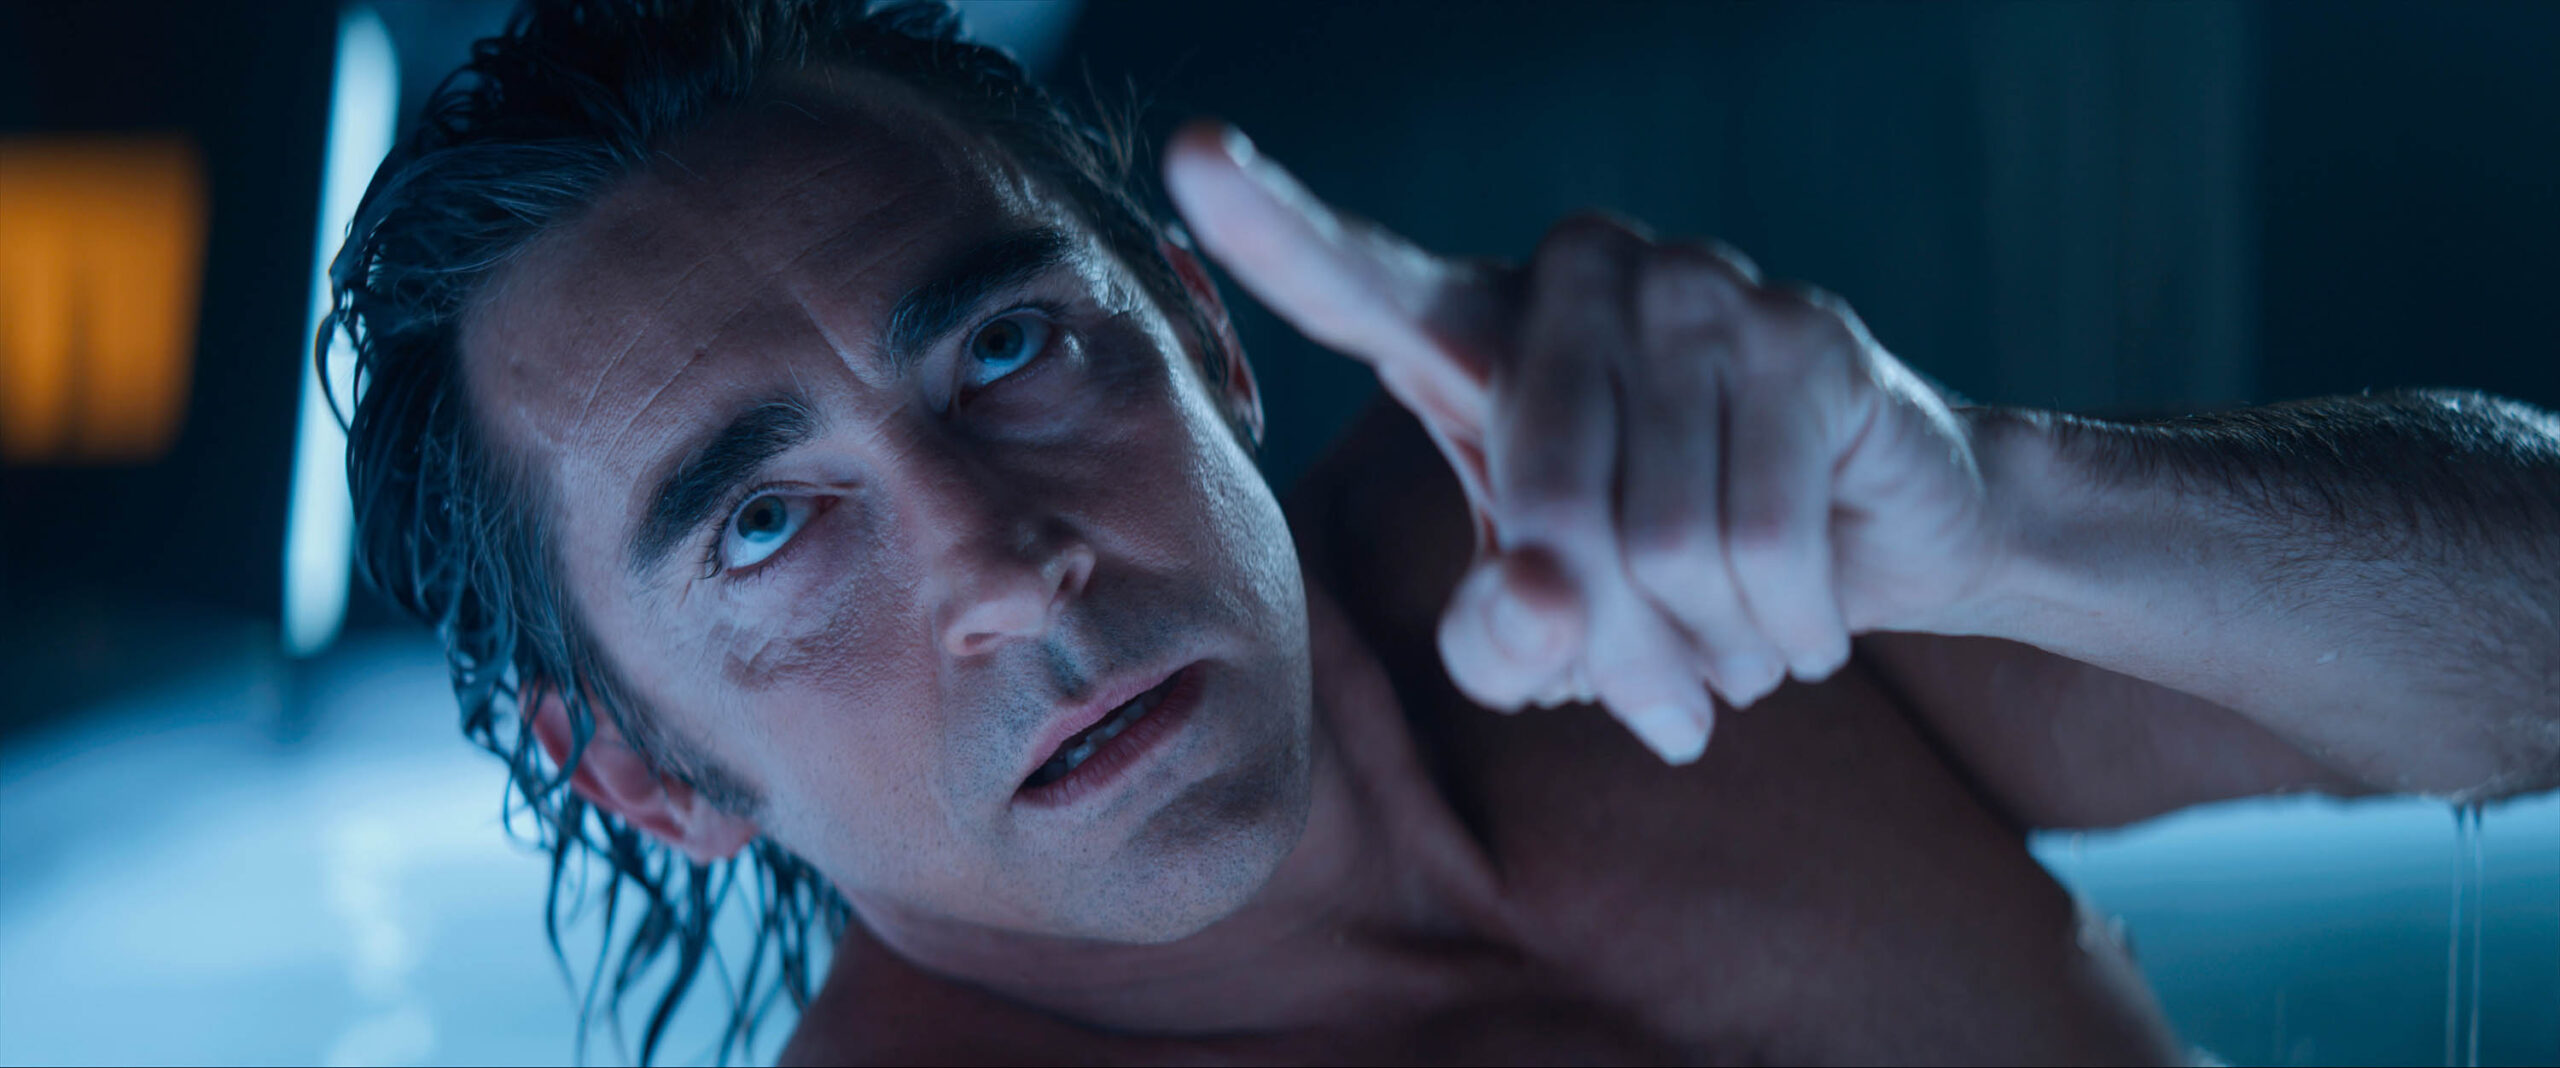 Lee Pace in Foundation 2x01 [tag: Lee Pace] [credit: courtesy of Apple]